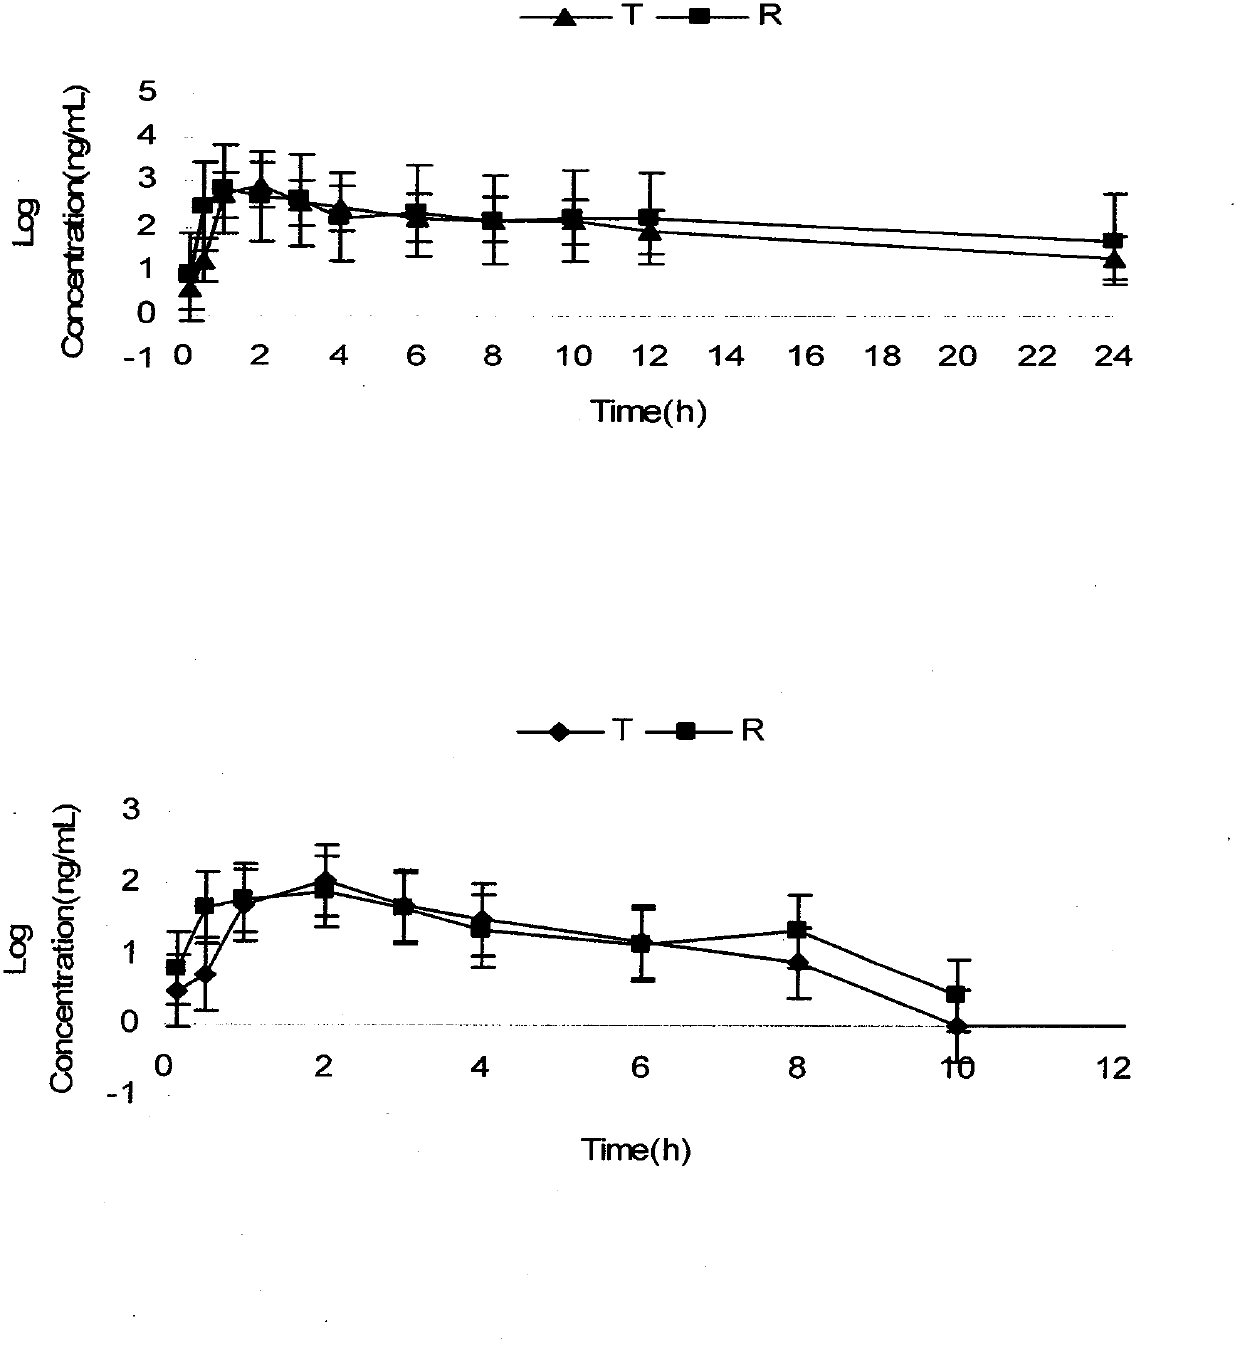 Compound simvastatin nicotinate sustained-release capsules and preparation method thereof